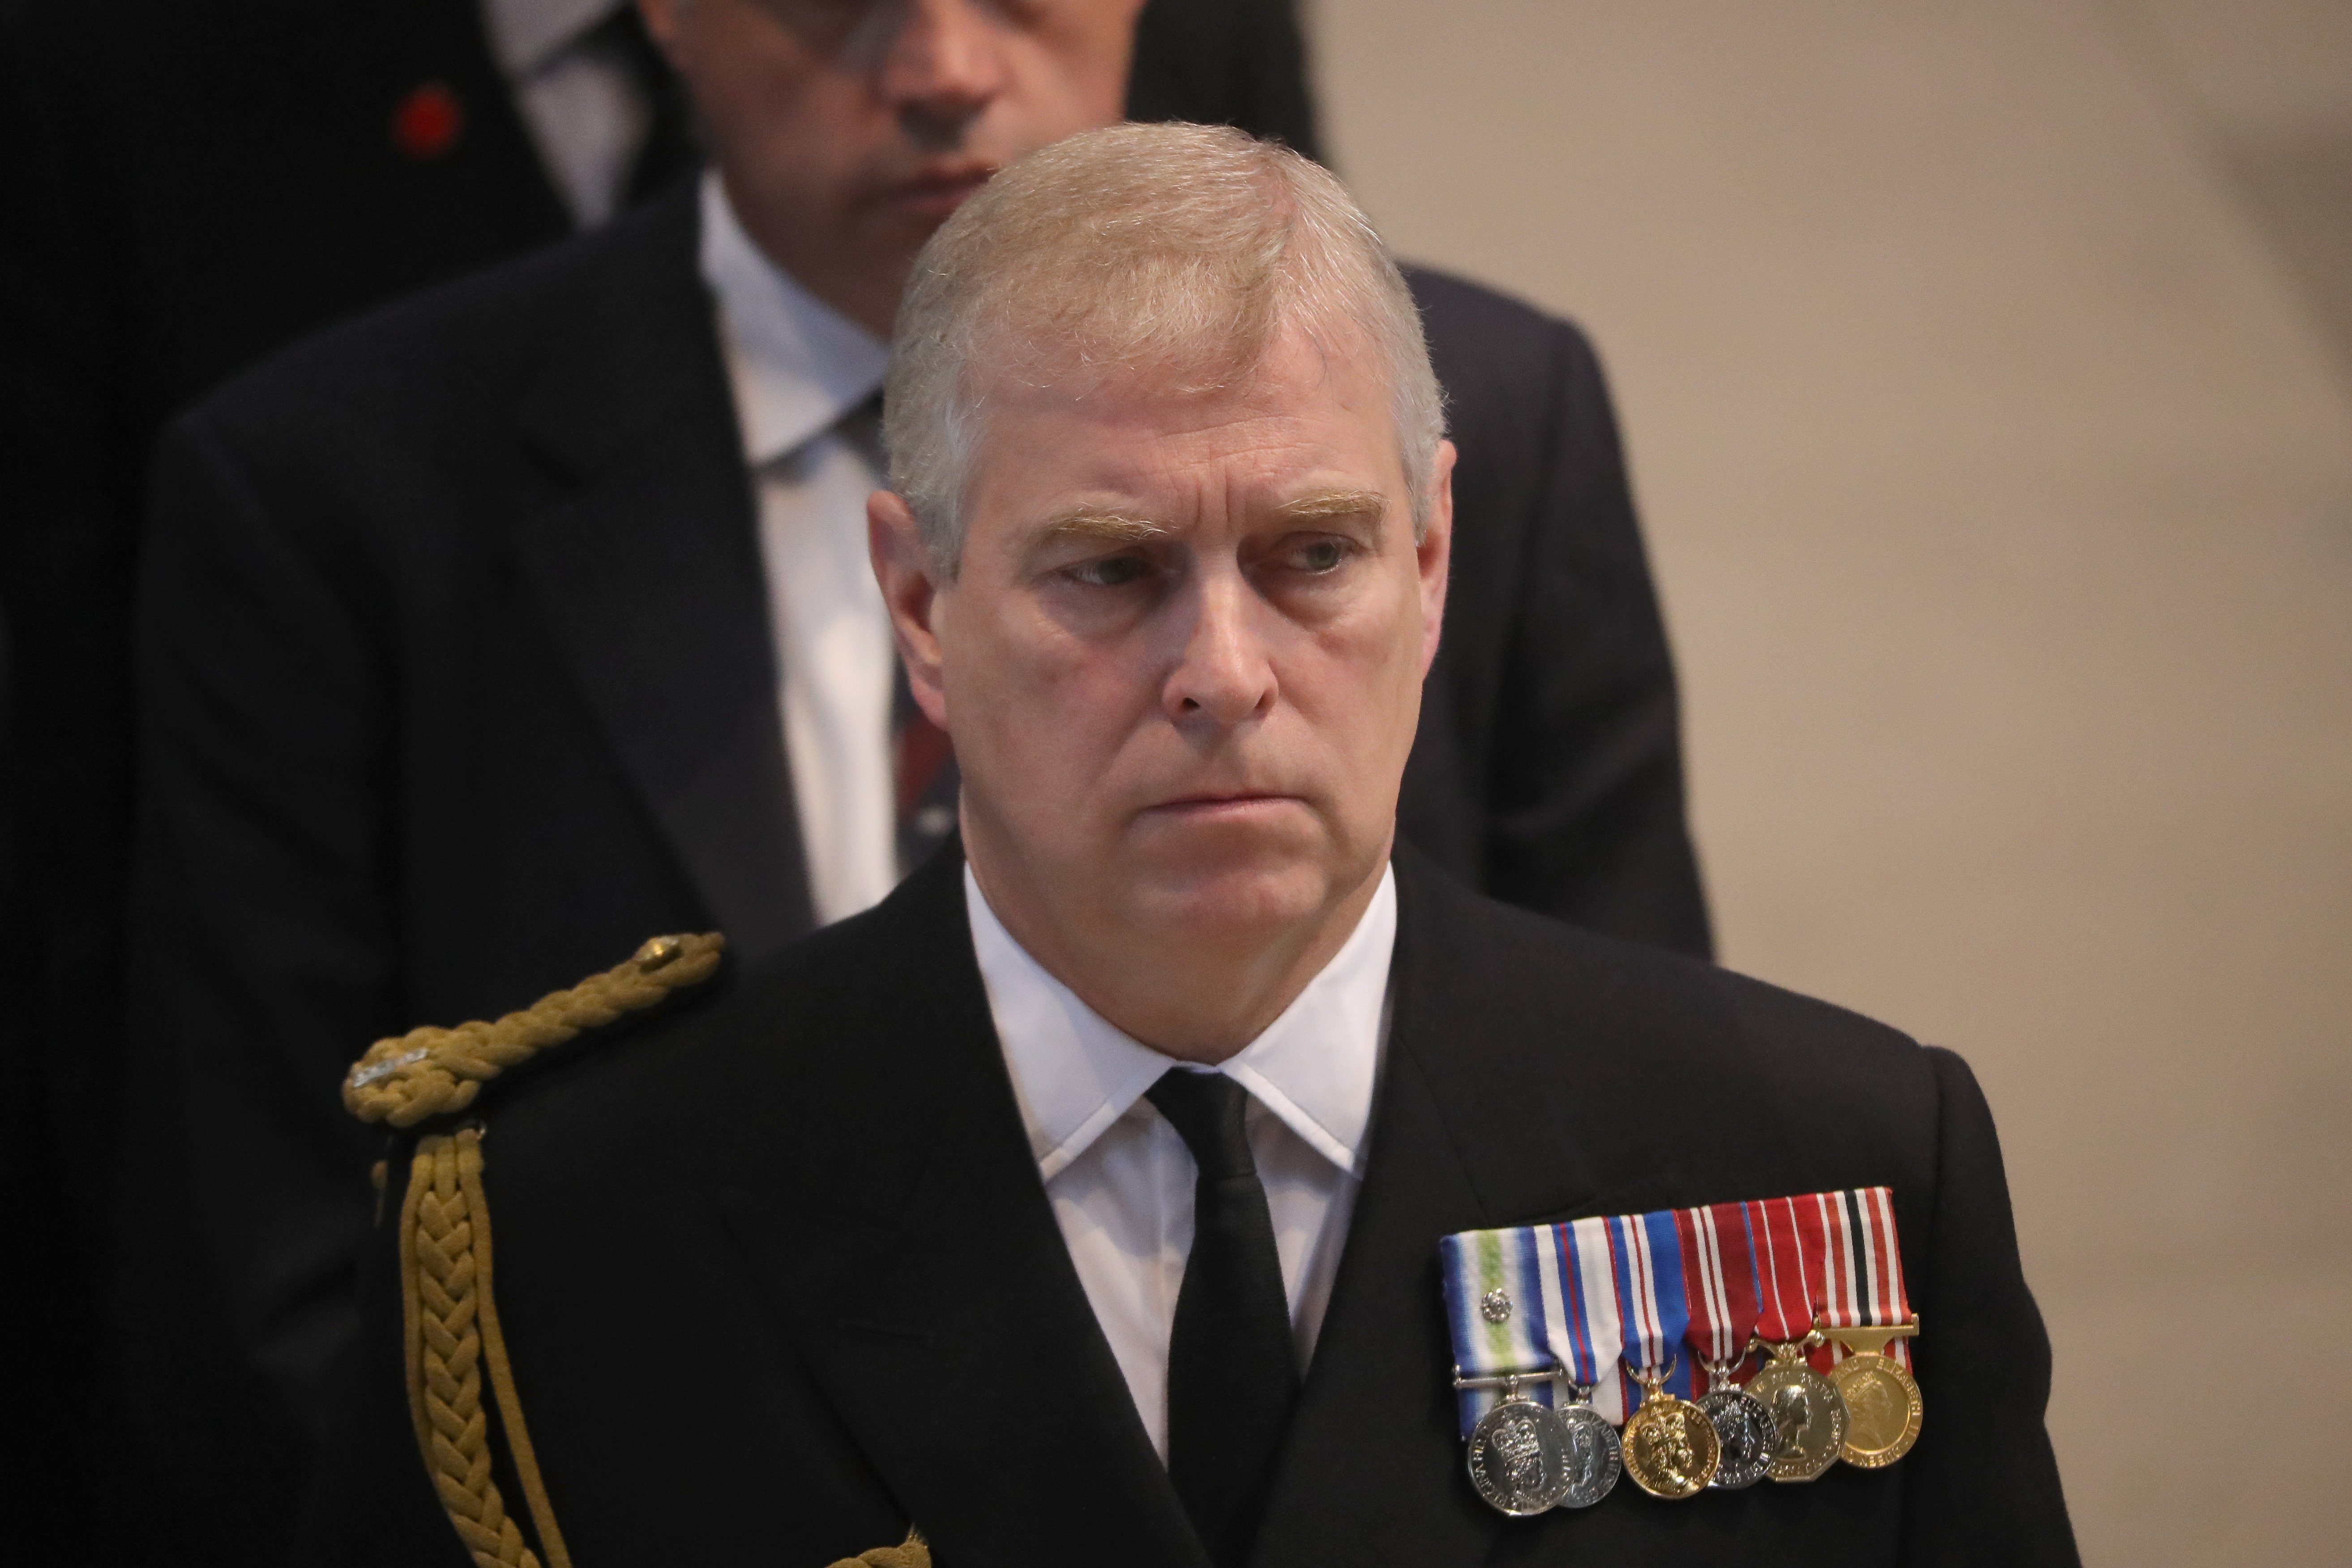 Prince Andrew at a service of remembrance at Manchester Cathedral on July 1, 2016 in Manchester, England |  Source: Getty Images